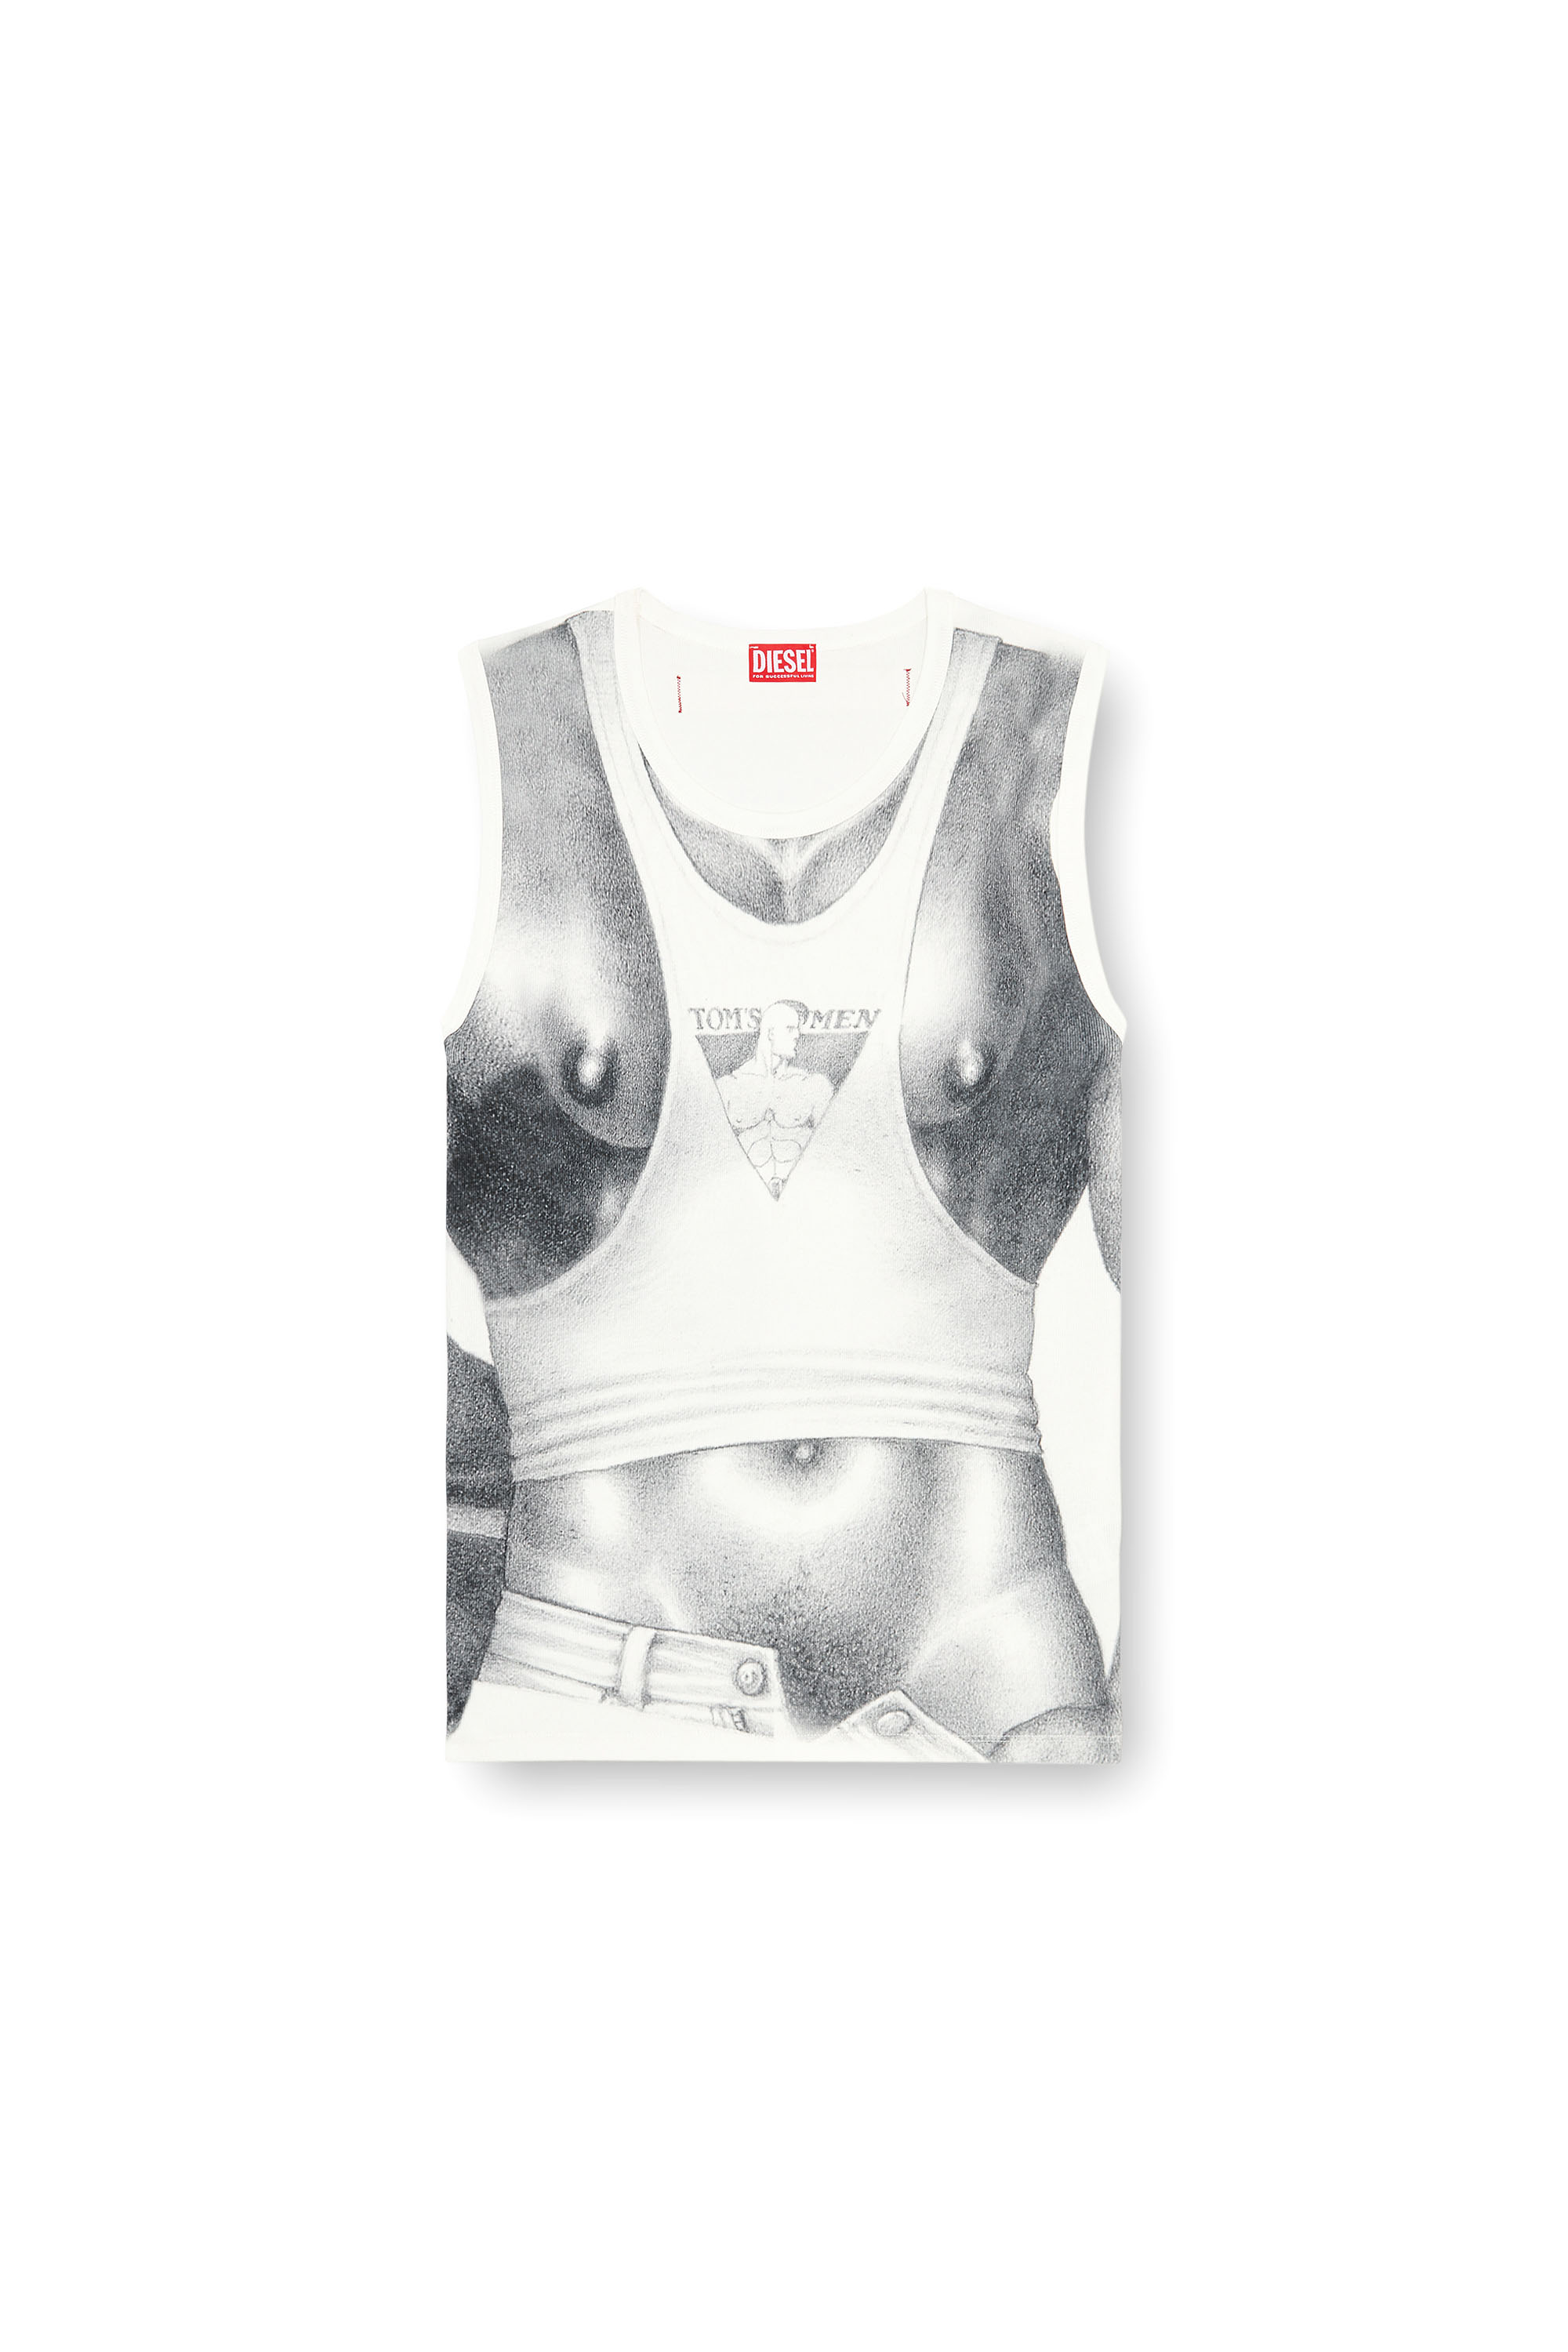 Diesel - PR-T-LIFTY-TOF, Unisex Canotta con stampa all-over in Bianco - Image 7